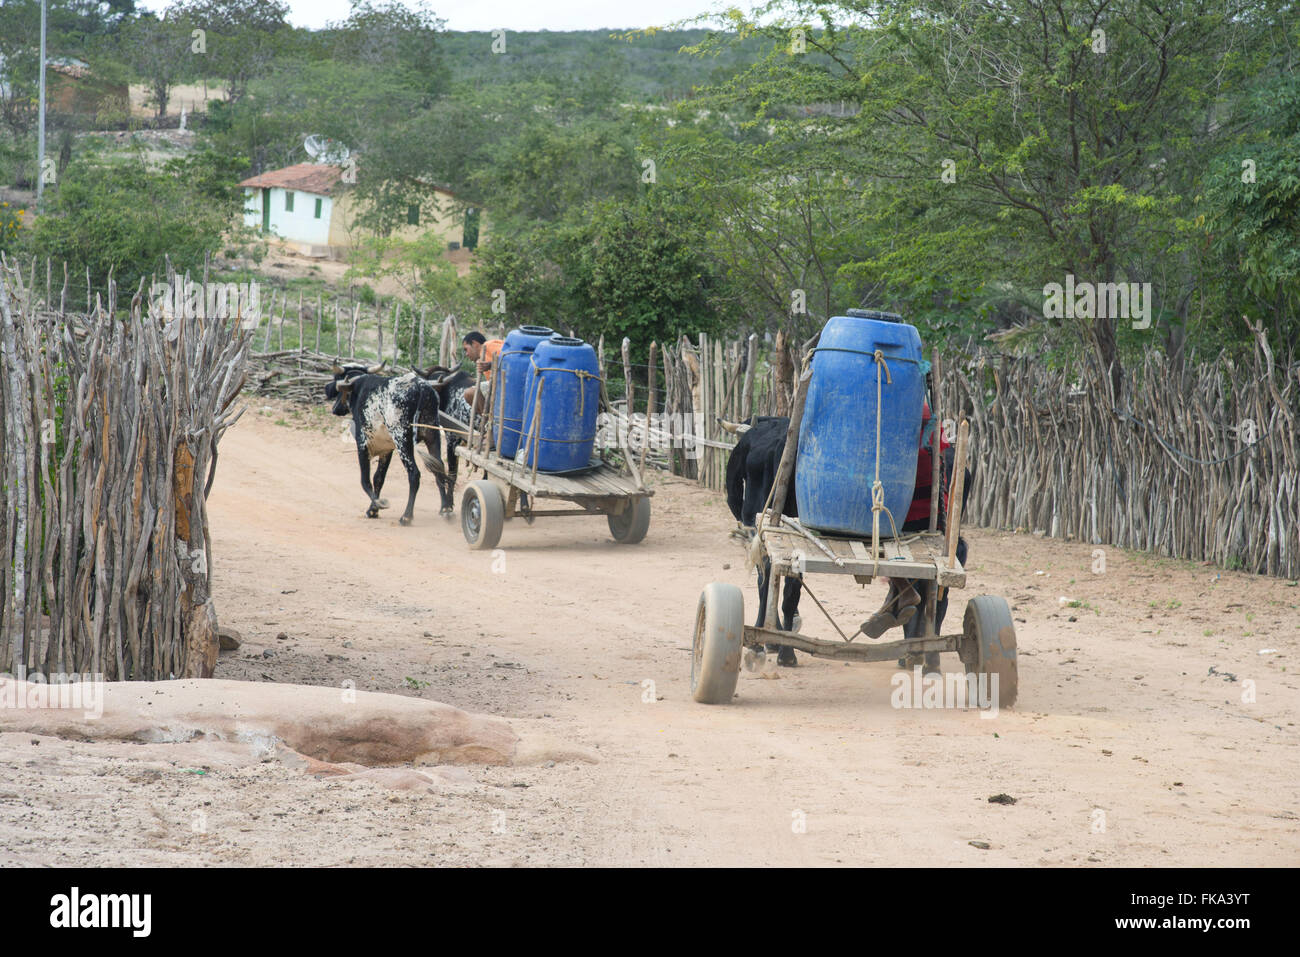 Ethnicity Kapinawá the Indians in the village or community Thresher carrying water on bullock cart Stock Photo